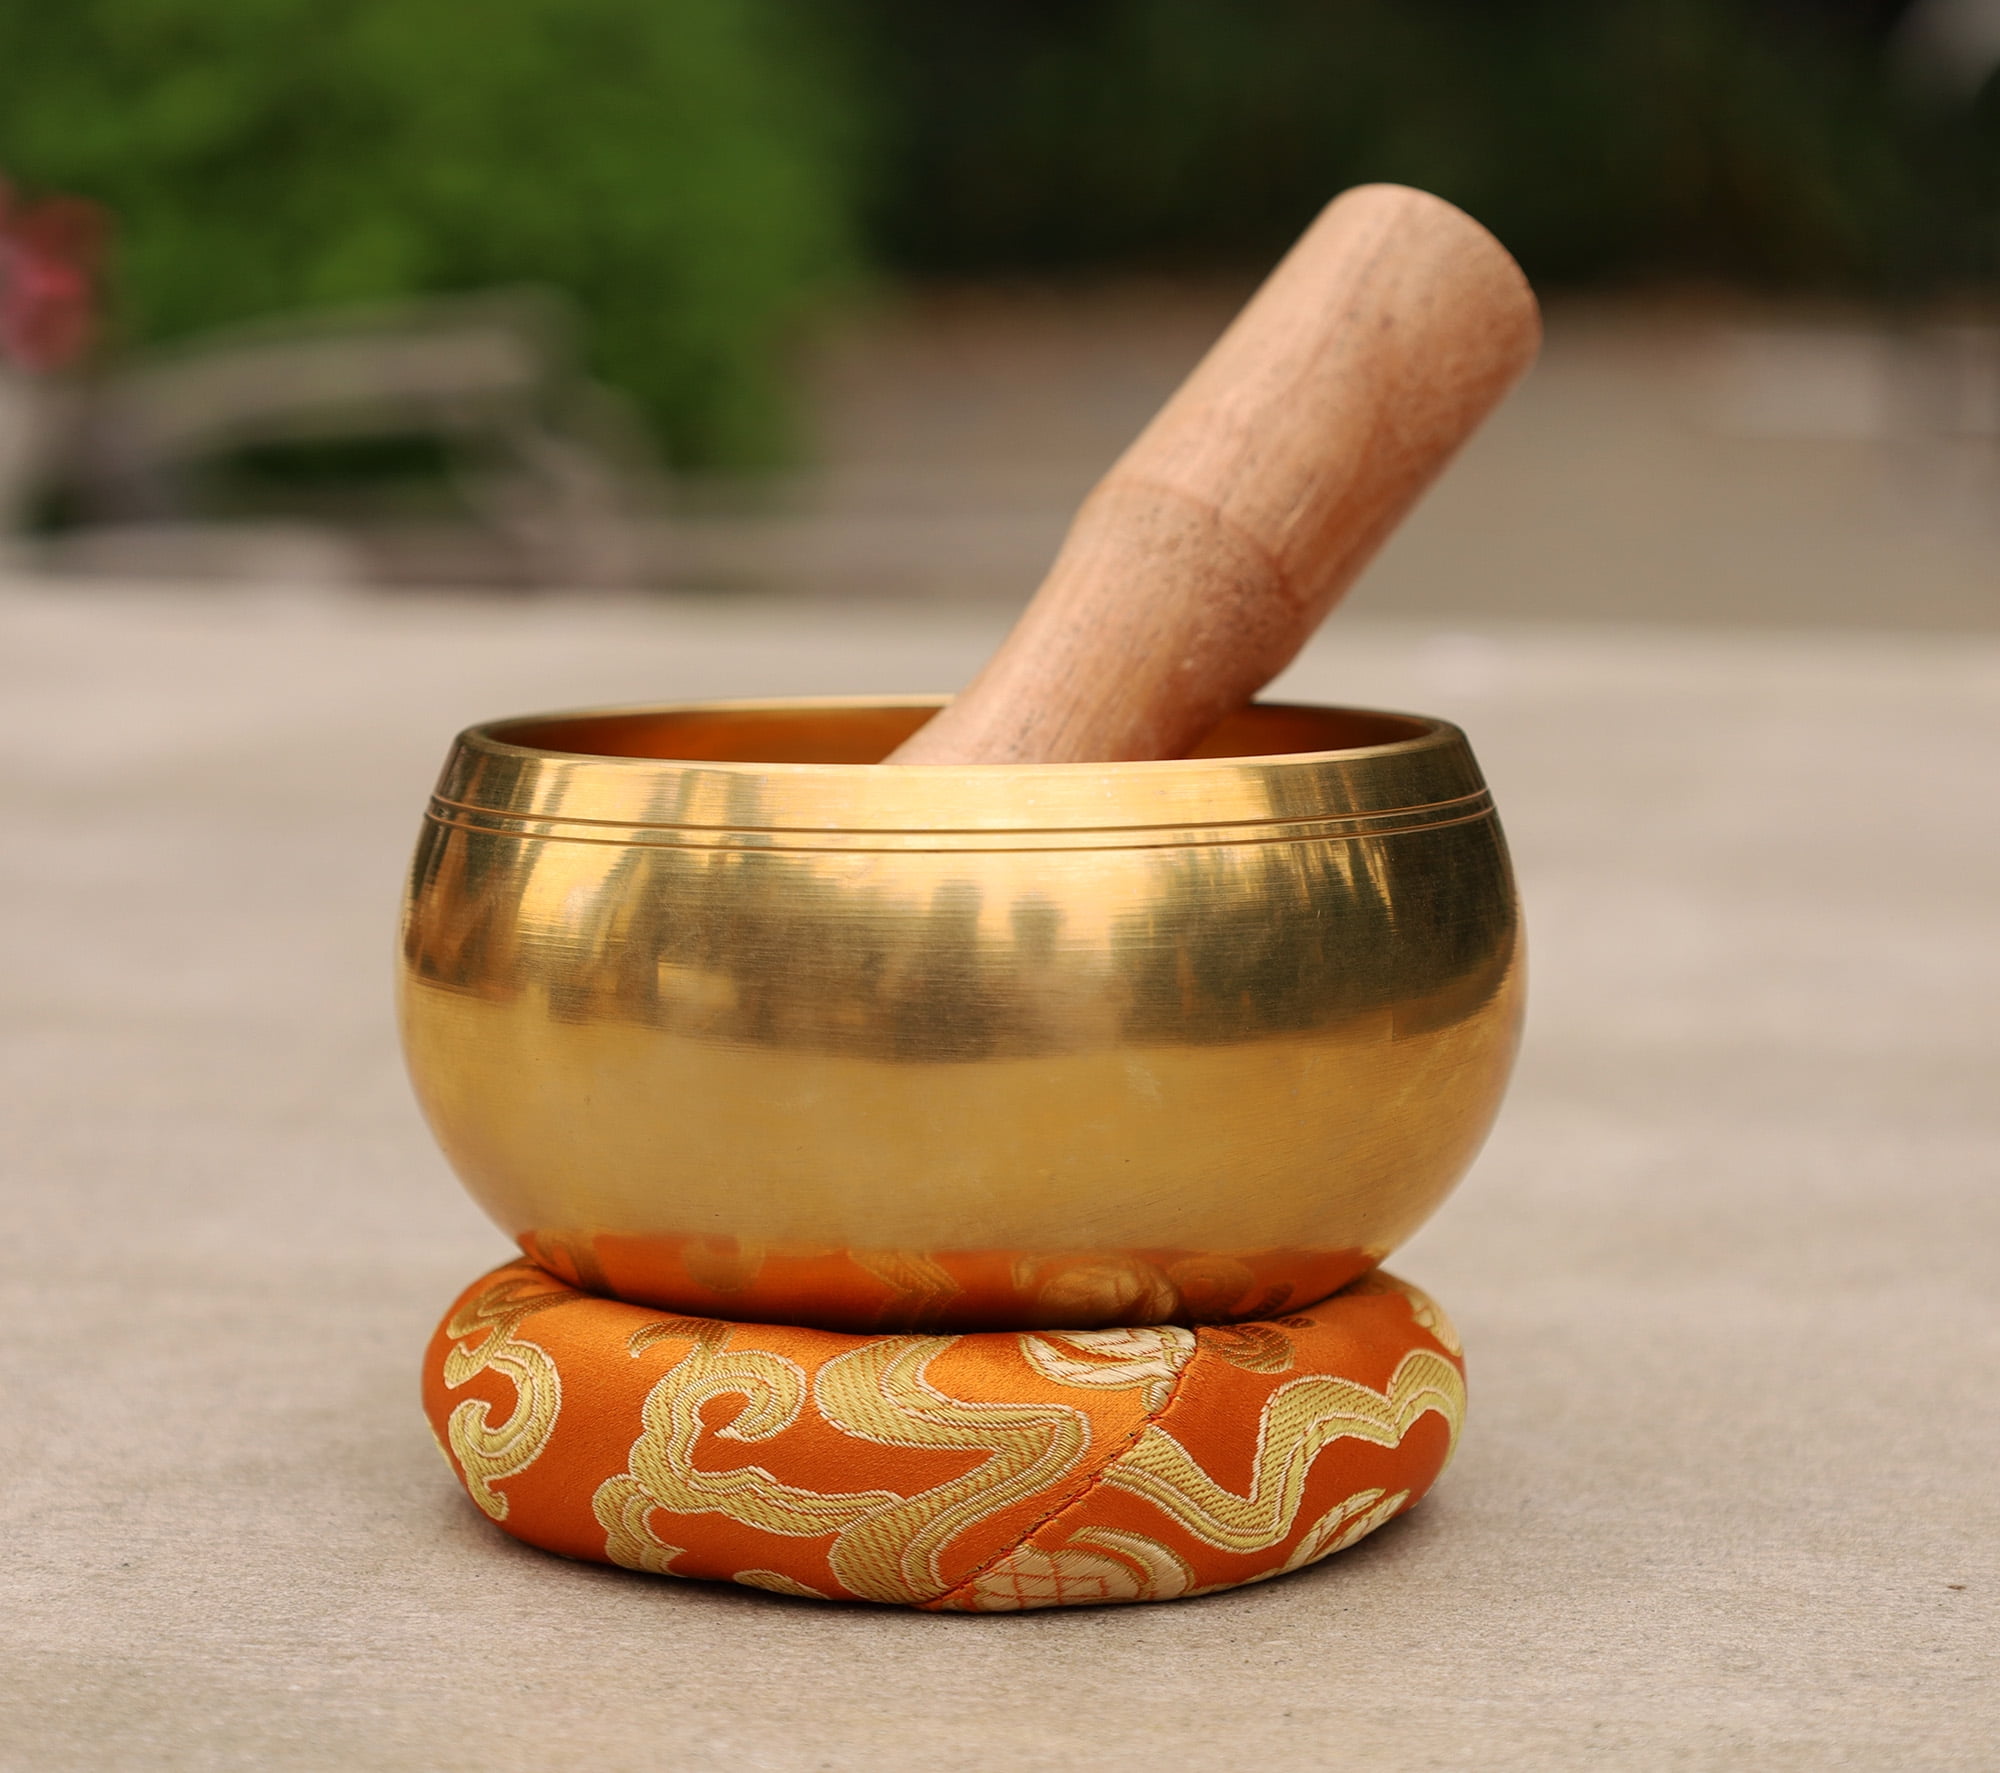 size:8cm wood stick Healing Relaxation Therapy,Stress & Anxiety Relief,Chakra Healing Tibetan Singing Bowl Set,Easy to Play with Dual-End Striker and Cushion,for Meditation 